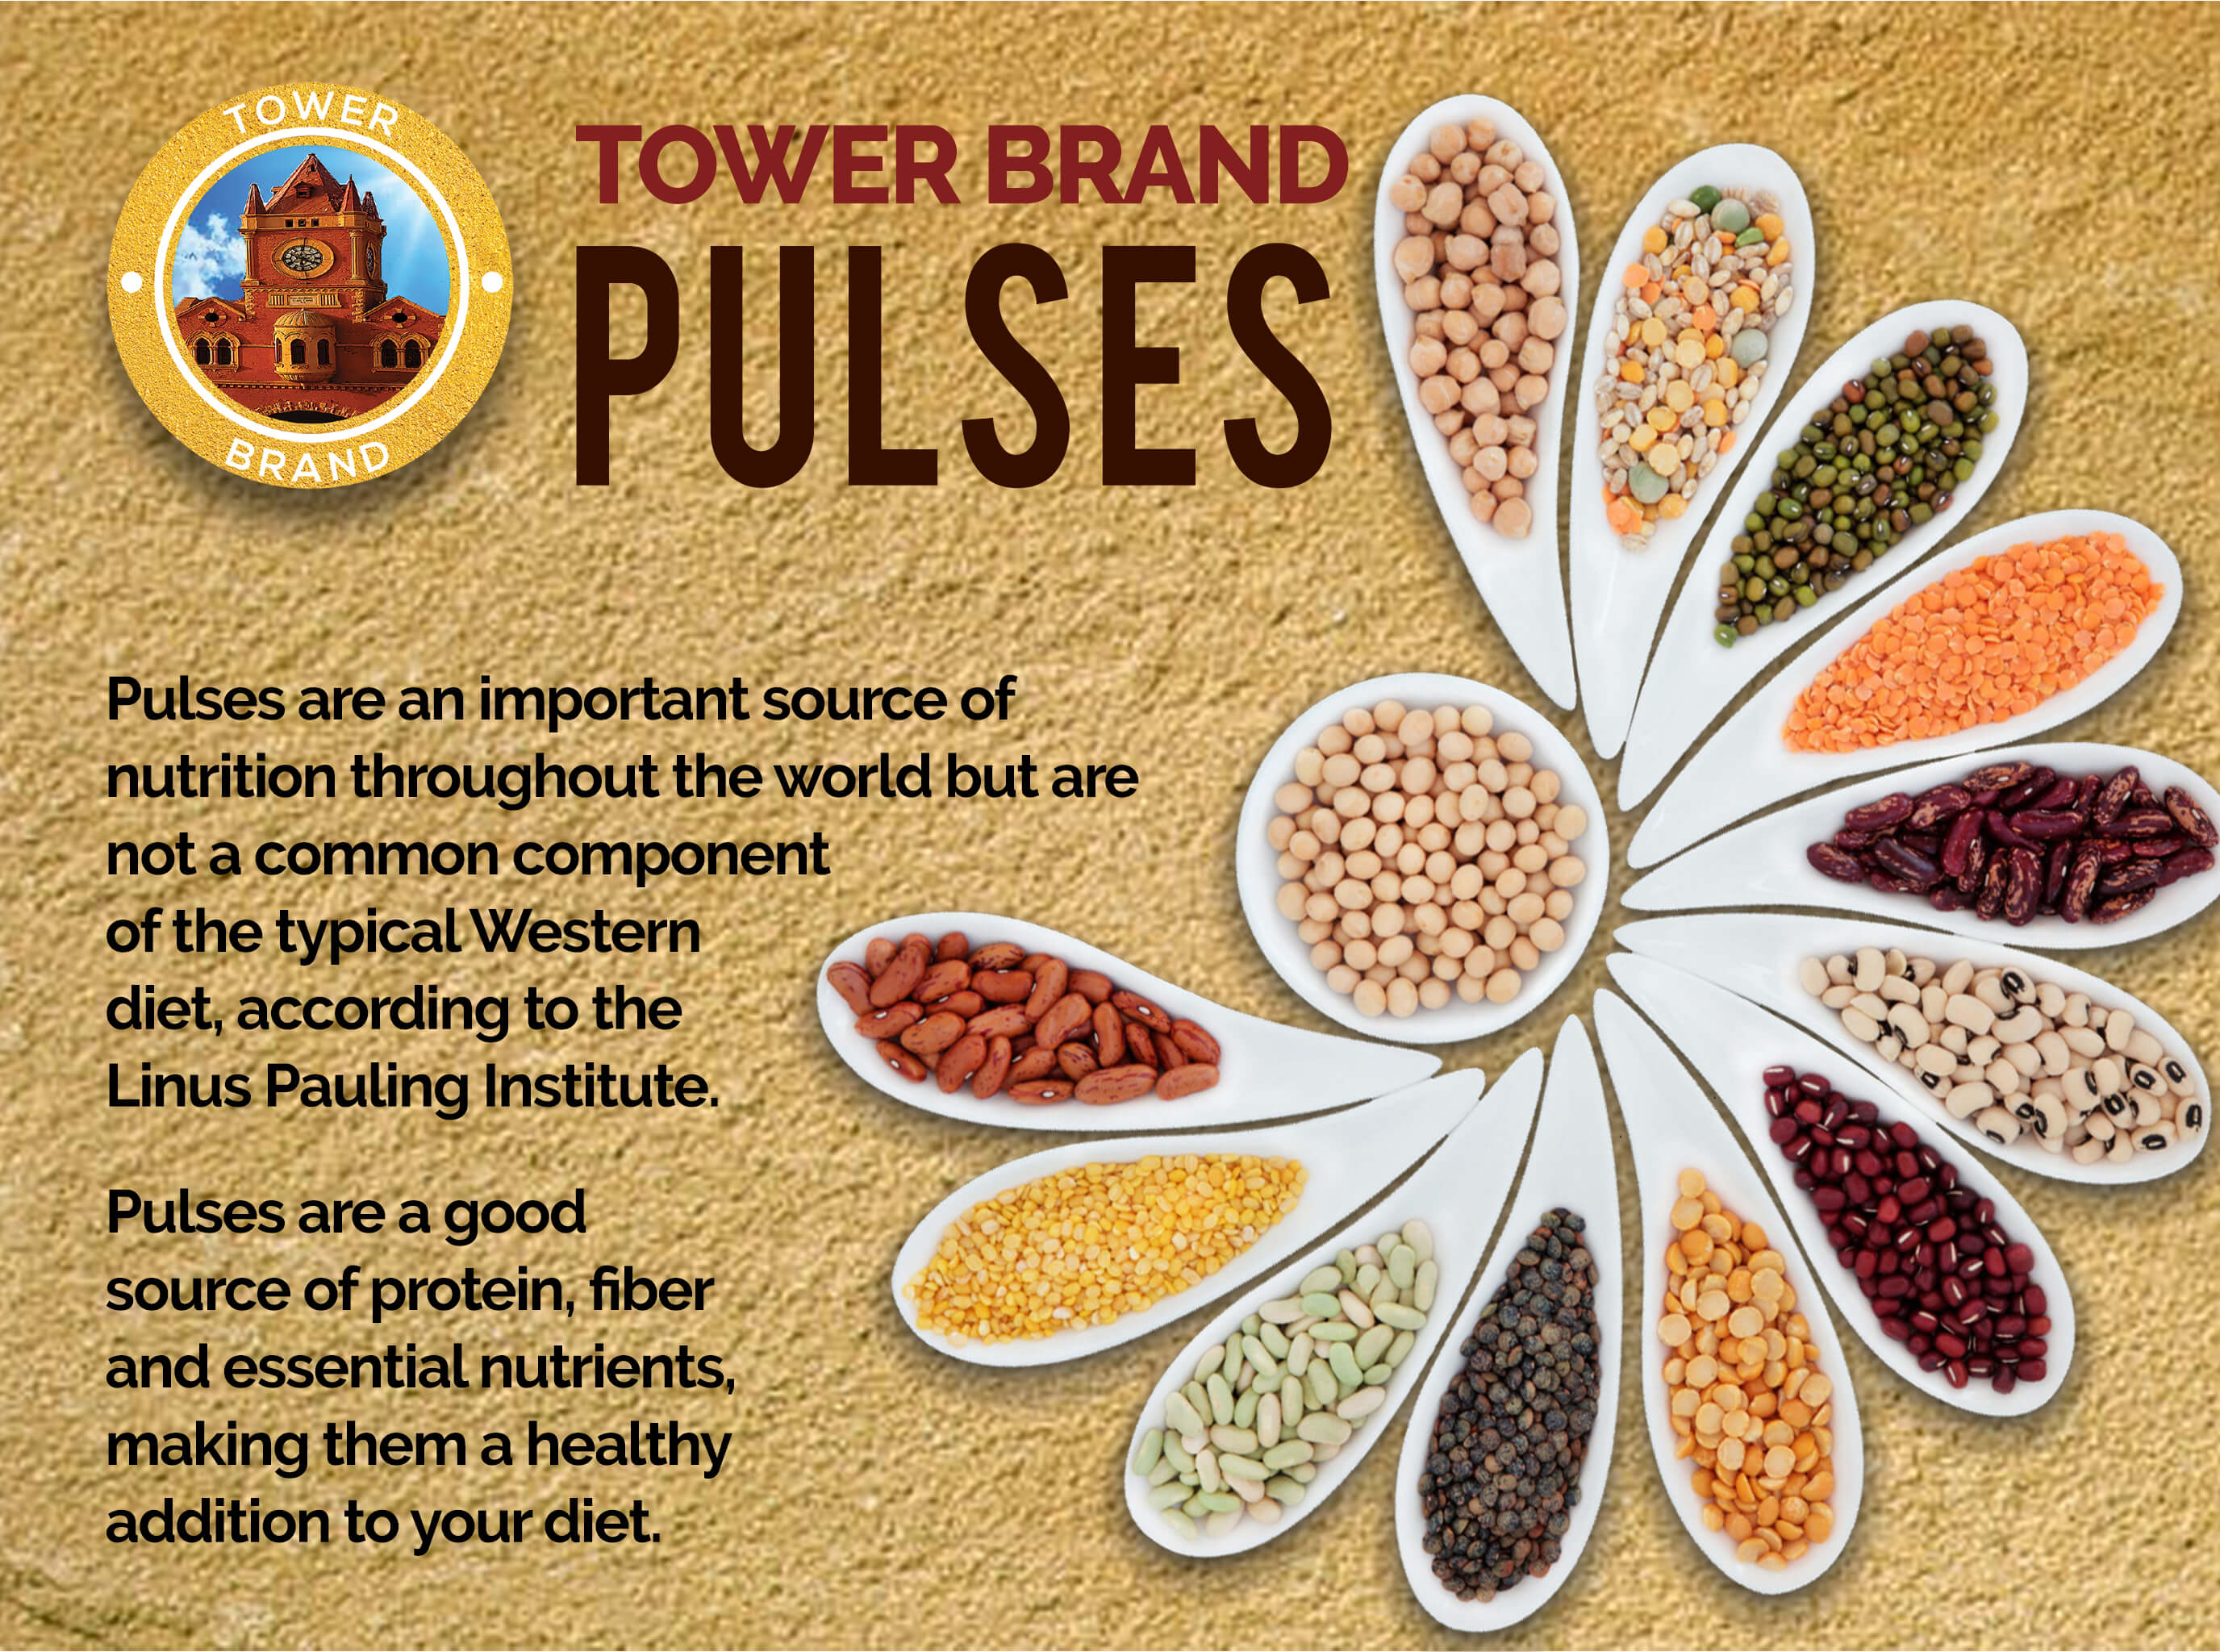 Tower Brand Pulses